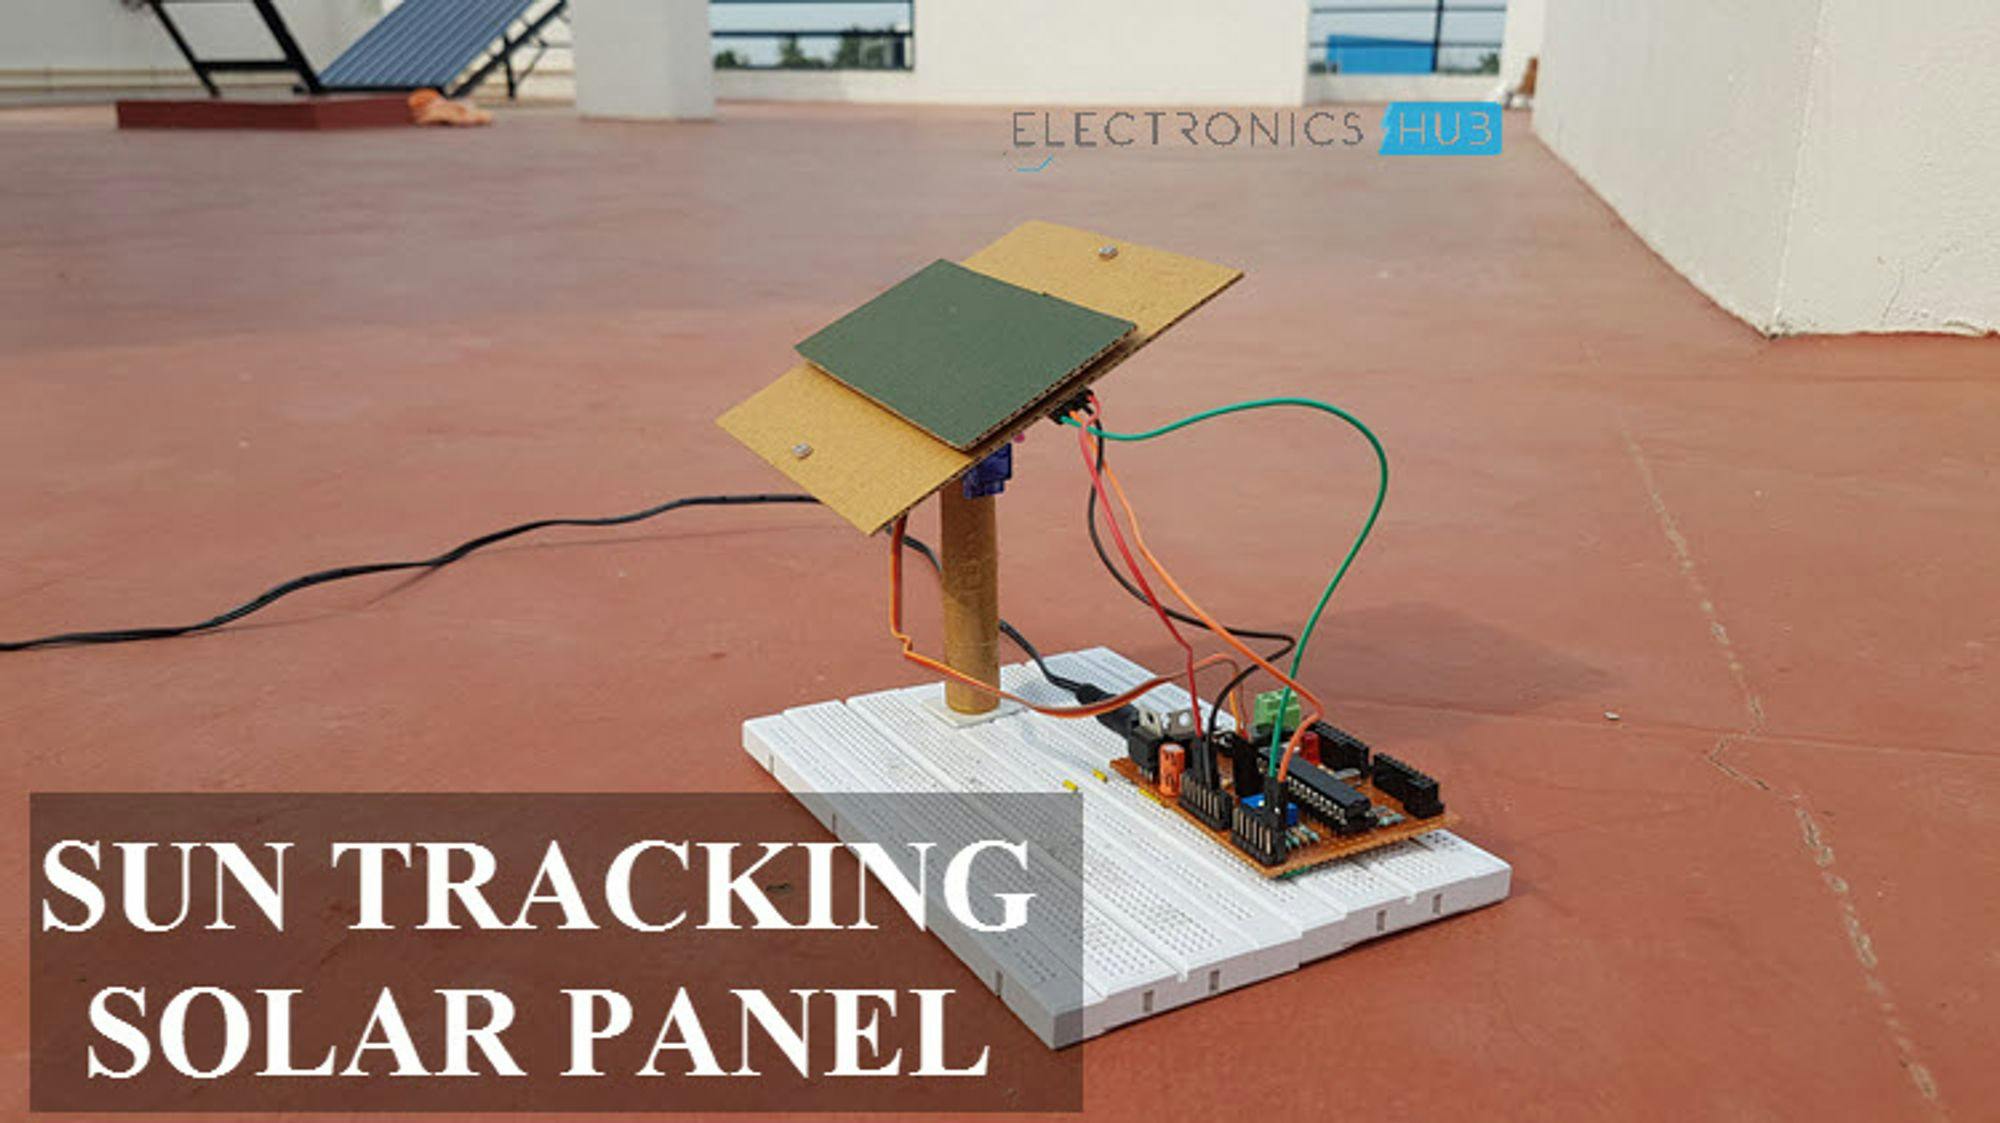 Sun Tracking Solar Panel Project using Microcontroller